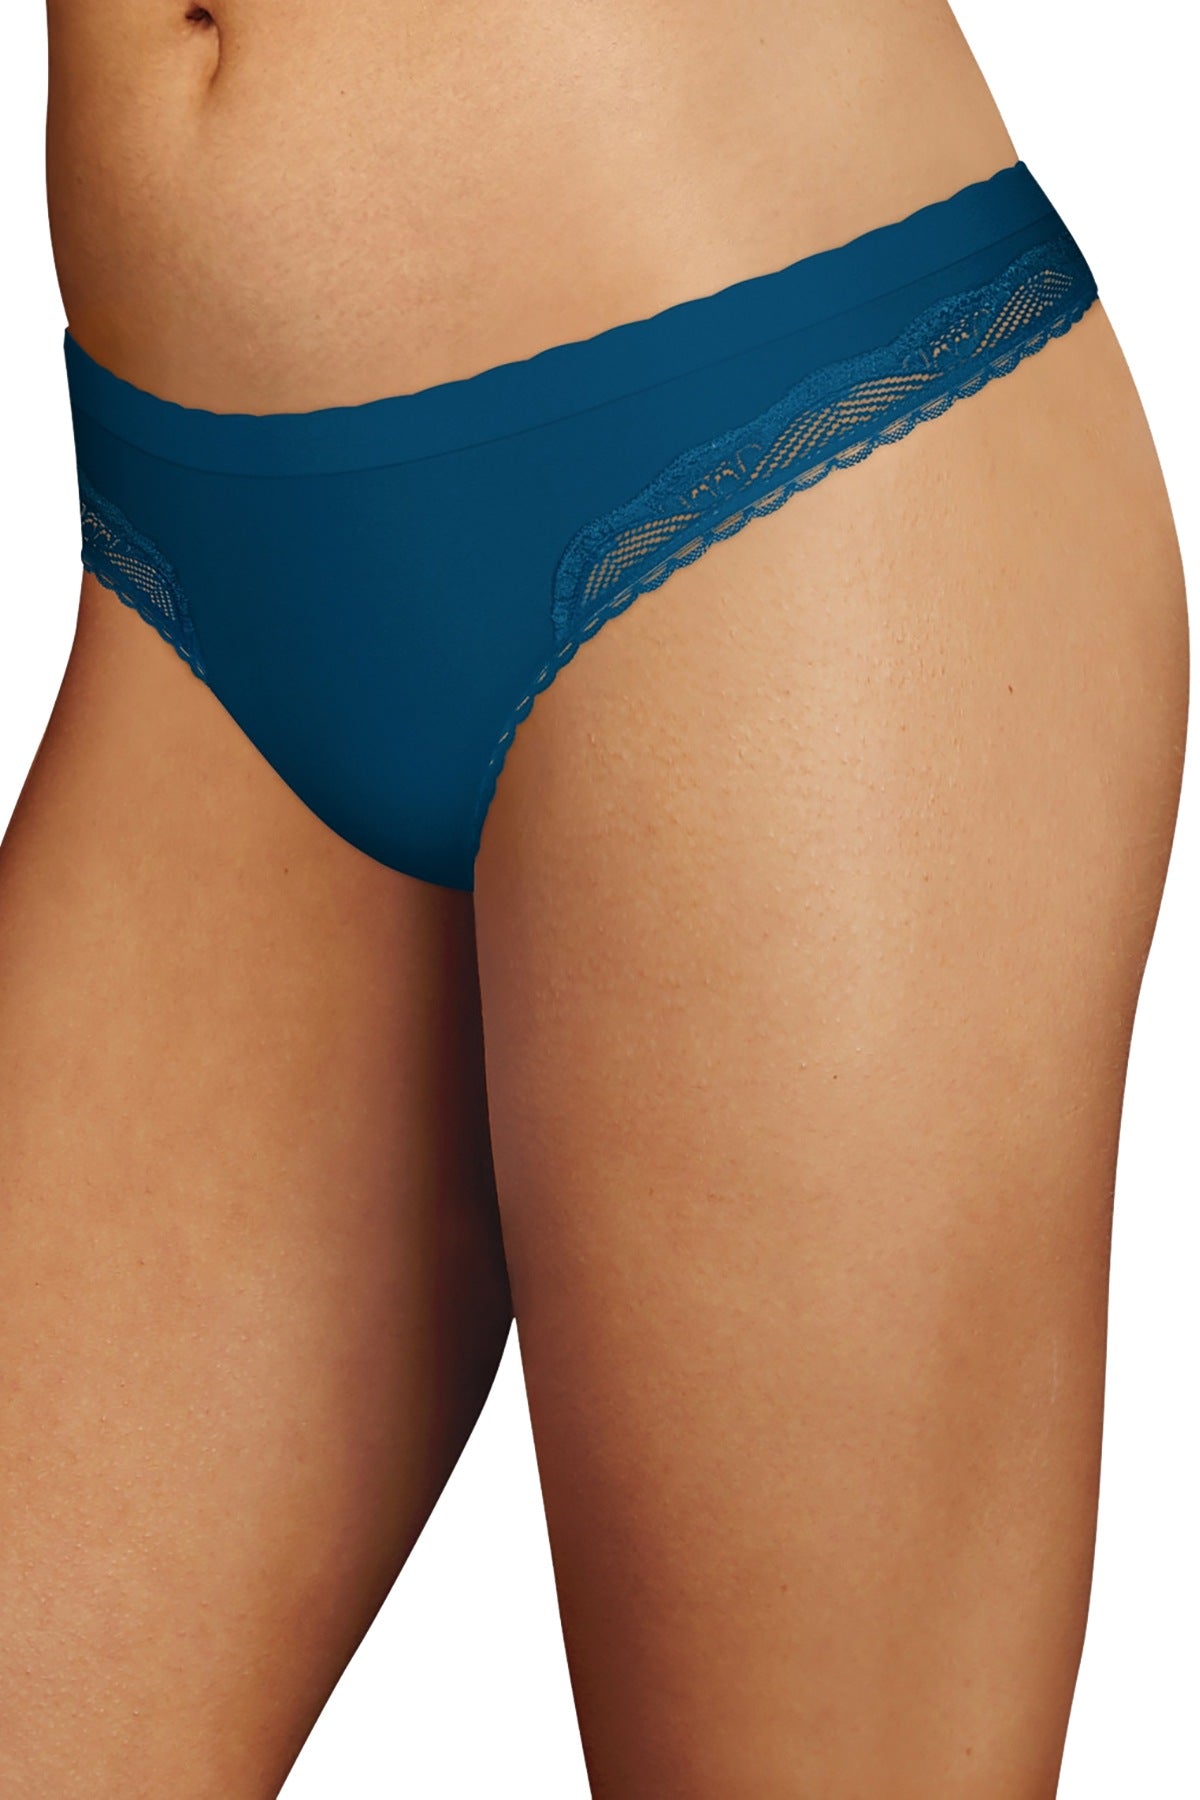 Maidenform Oceanic Blue Casual Comfort Thong